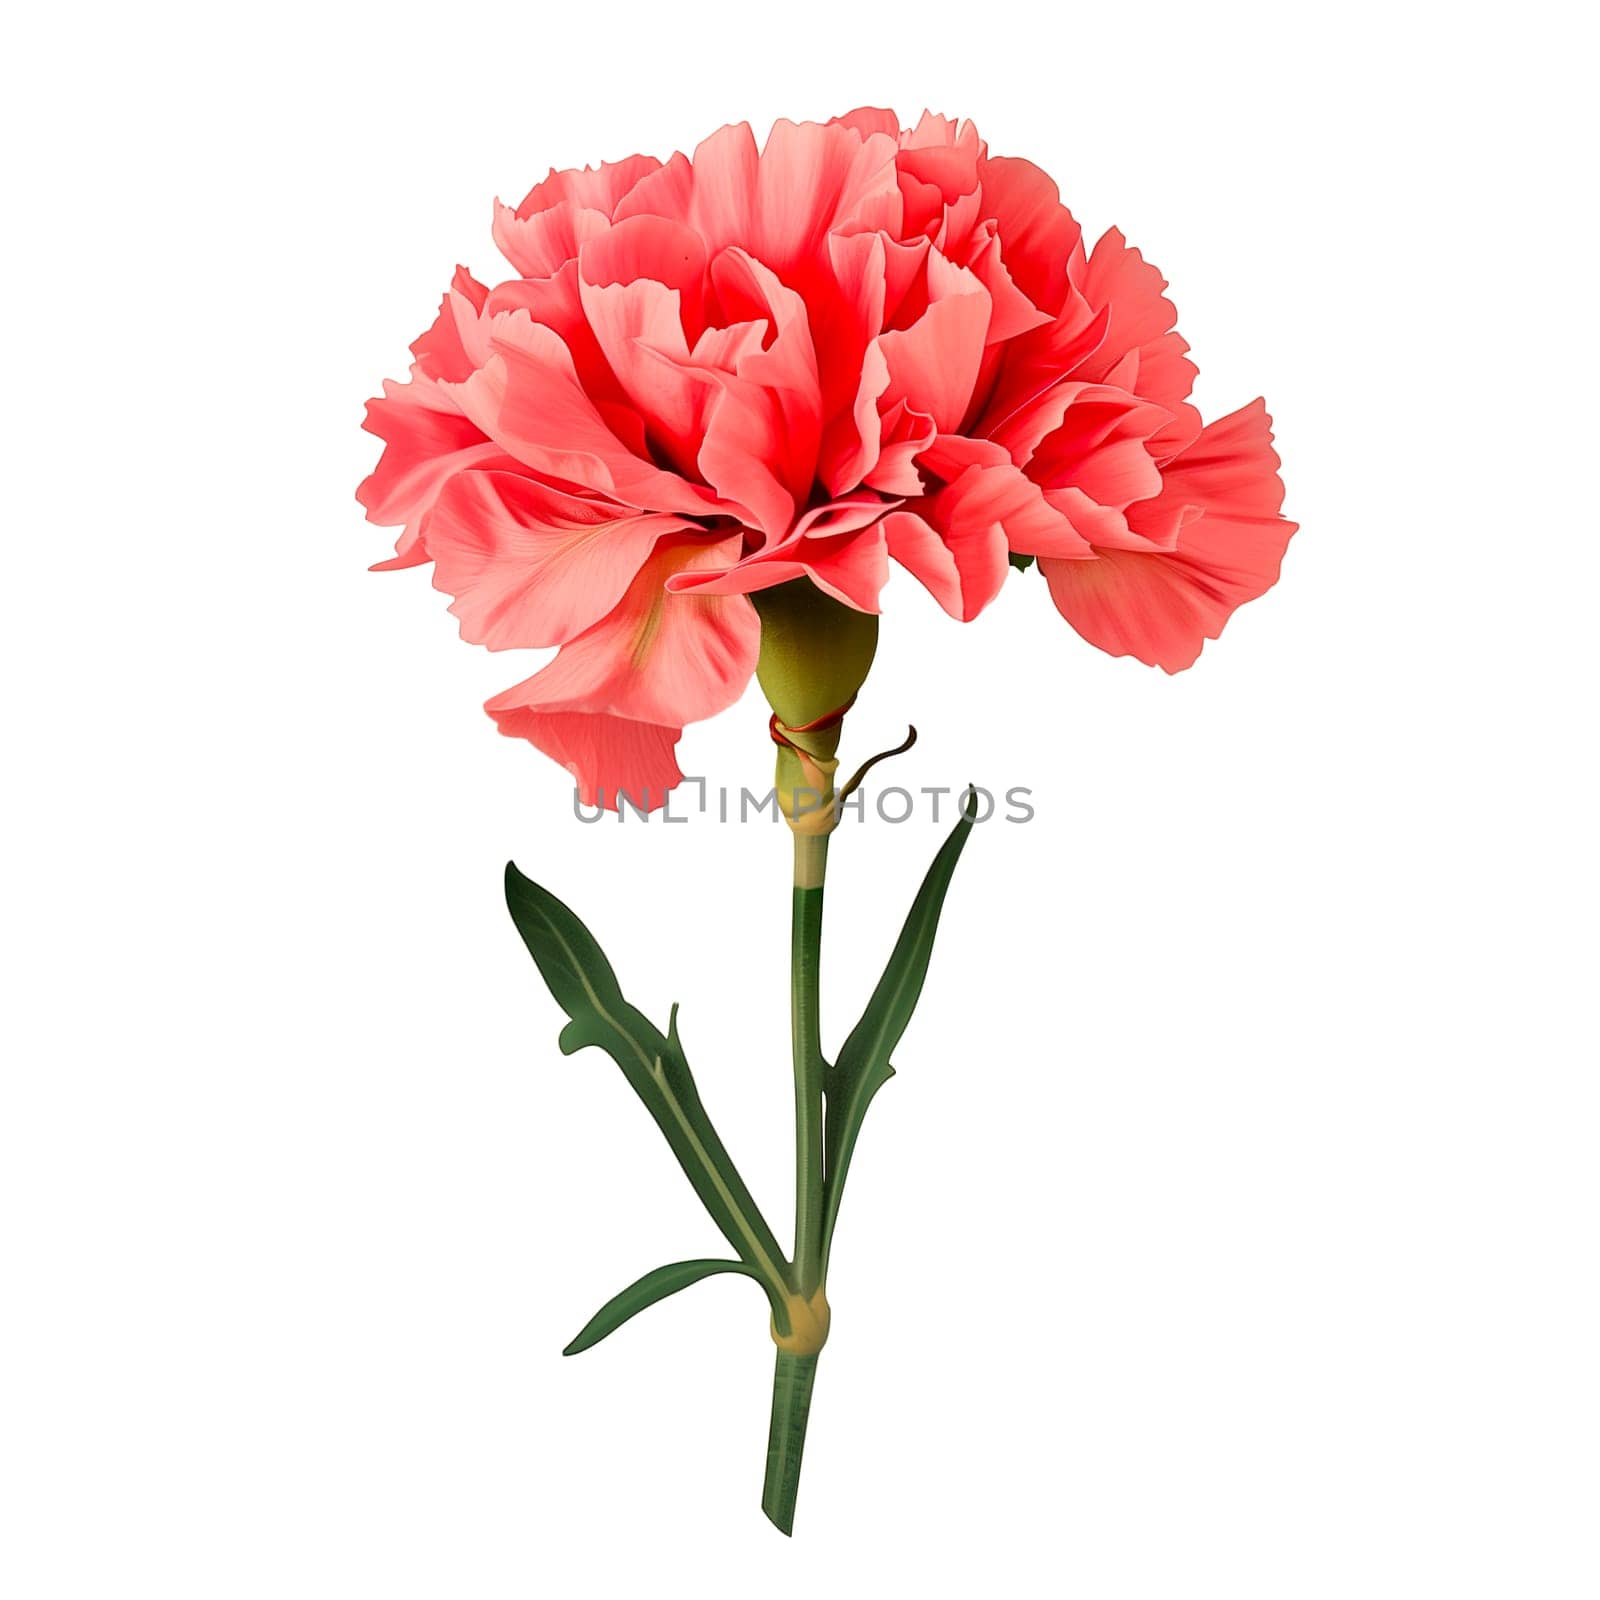 Isolated illustration of carnation floral element by Dustick